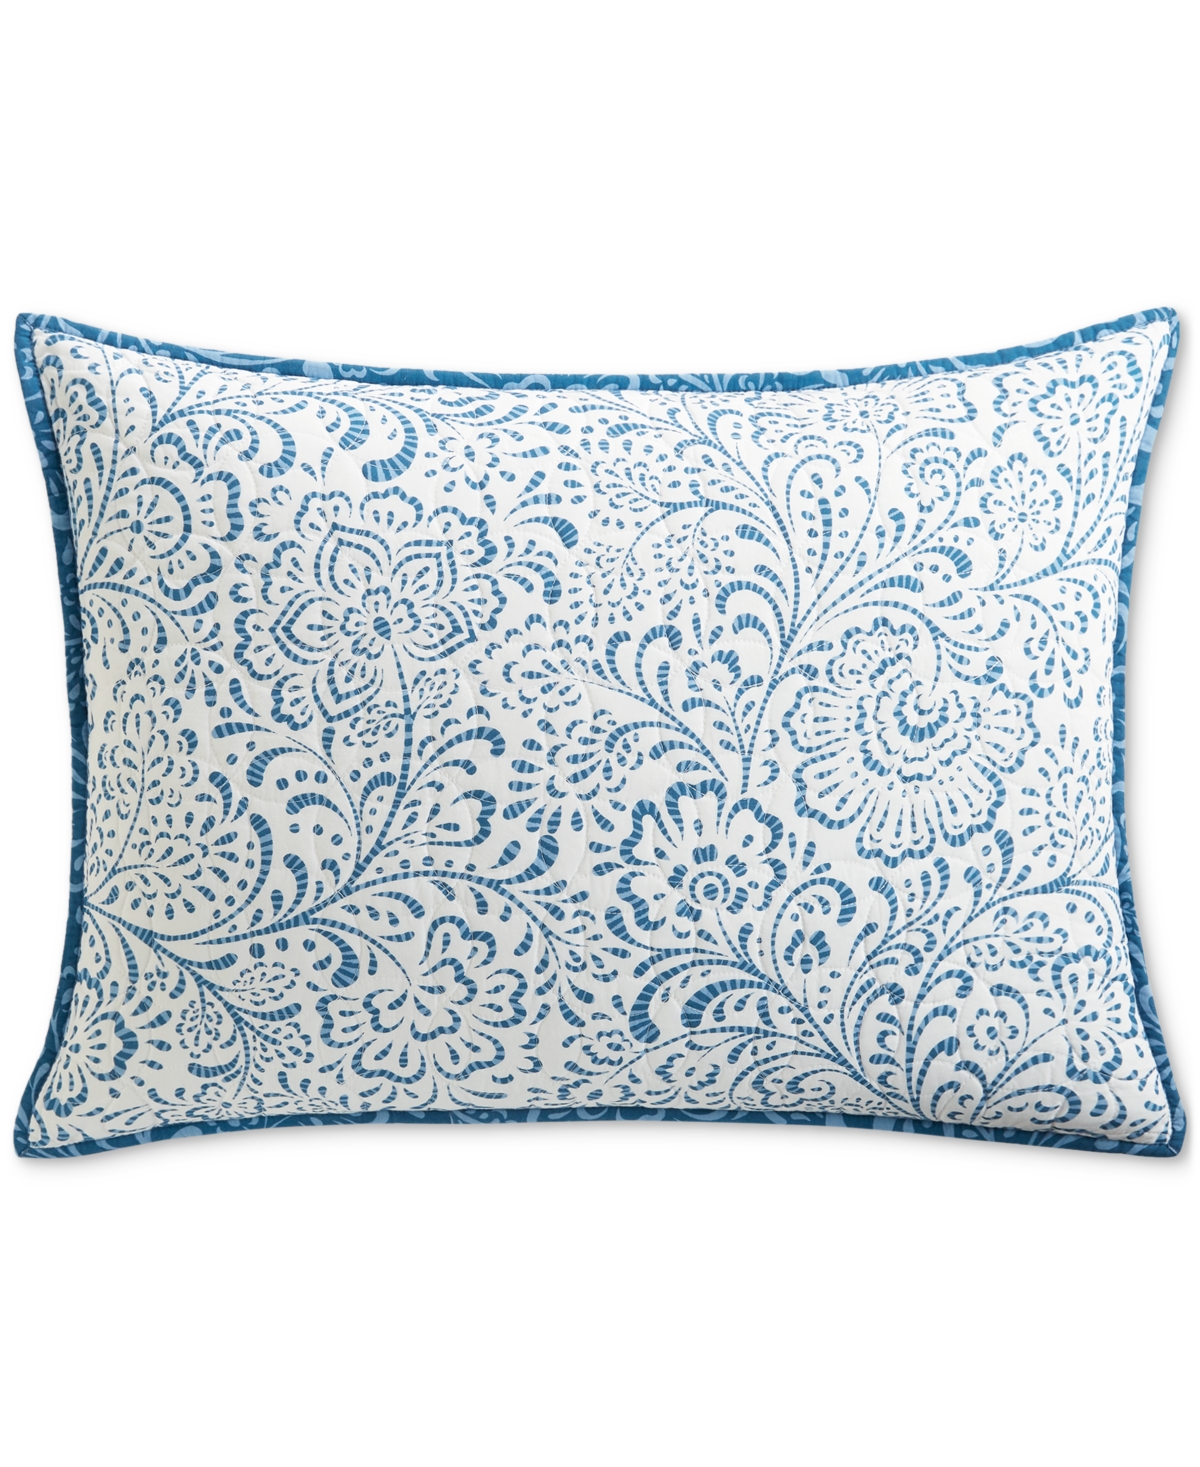 Painted Floral Cotton Sham, King, Created for Macy's - Blue Combo